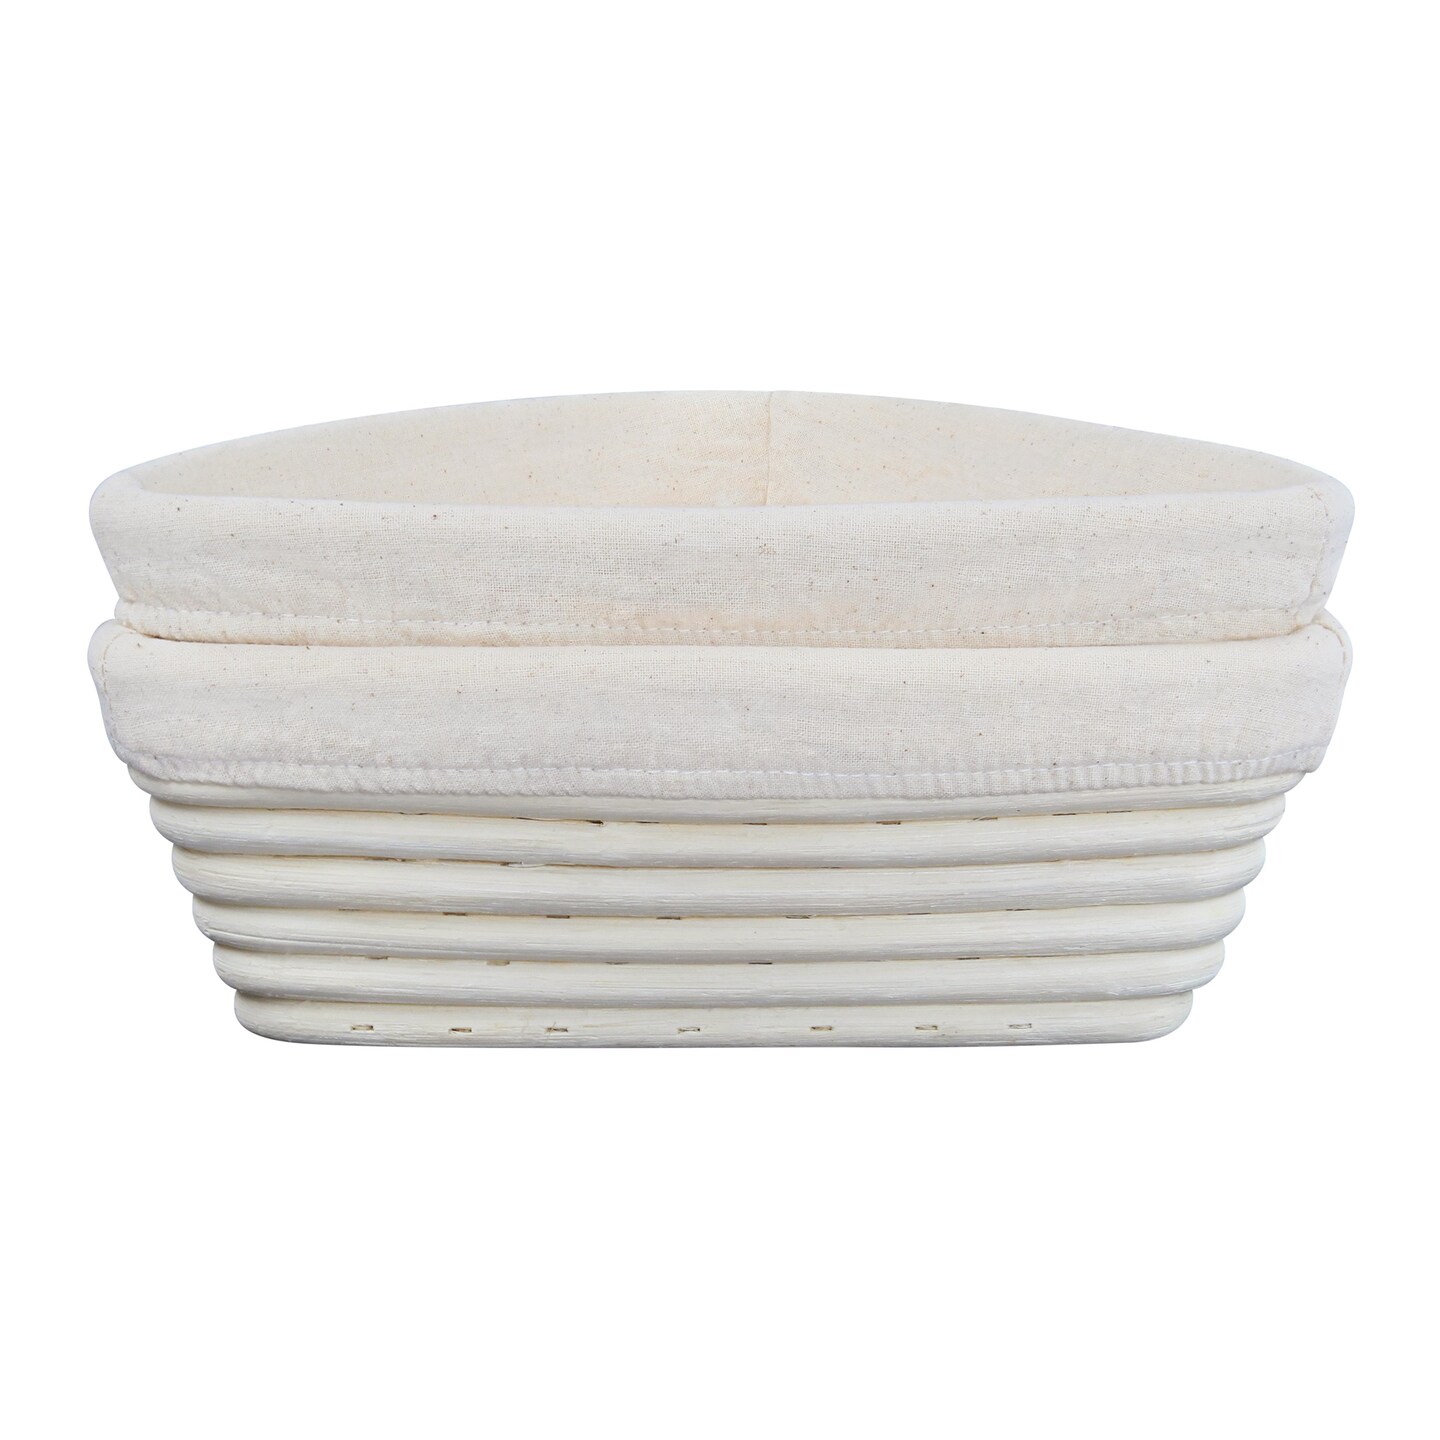 Potted Pans Sourdough Banneton Bread Proofing Basket Set of 2 with Cloth Liners